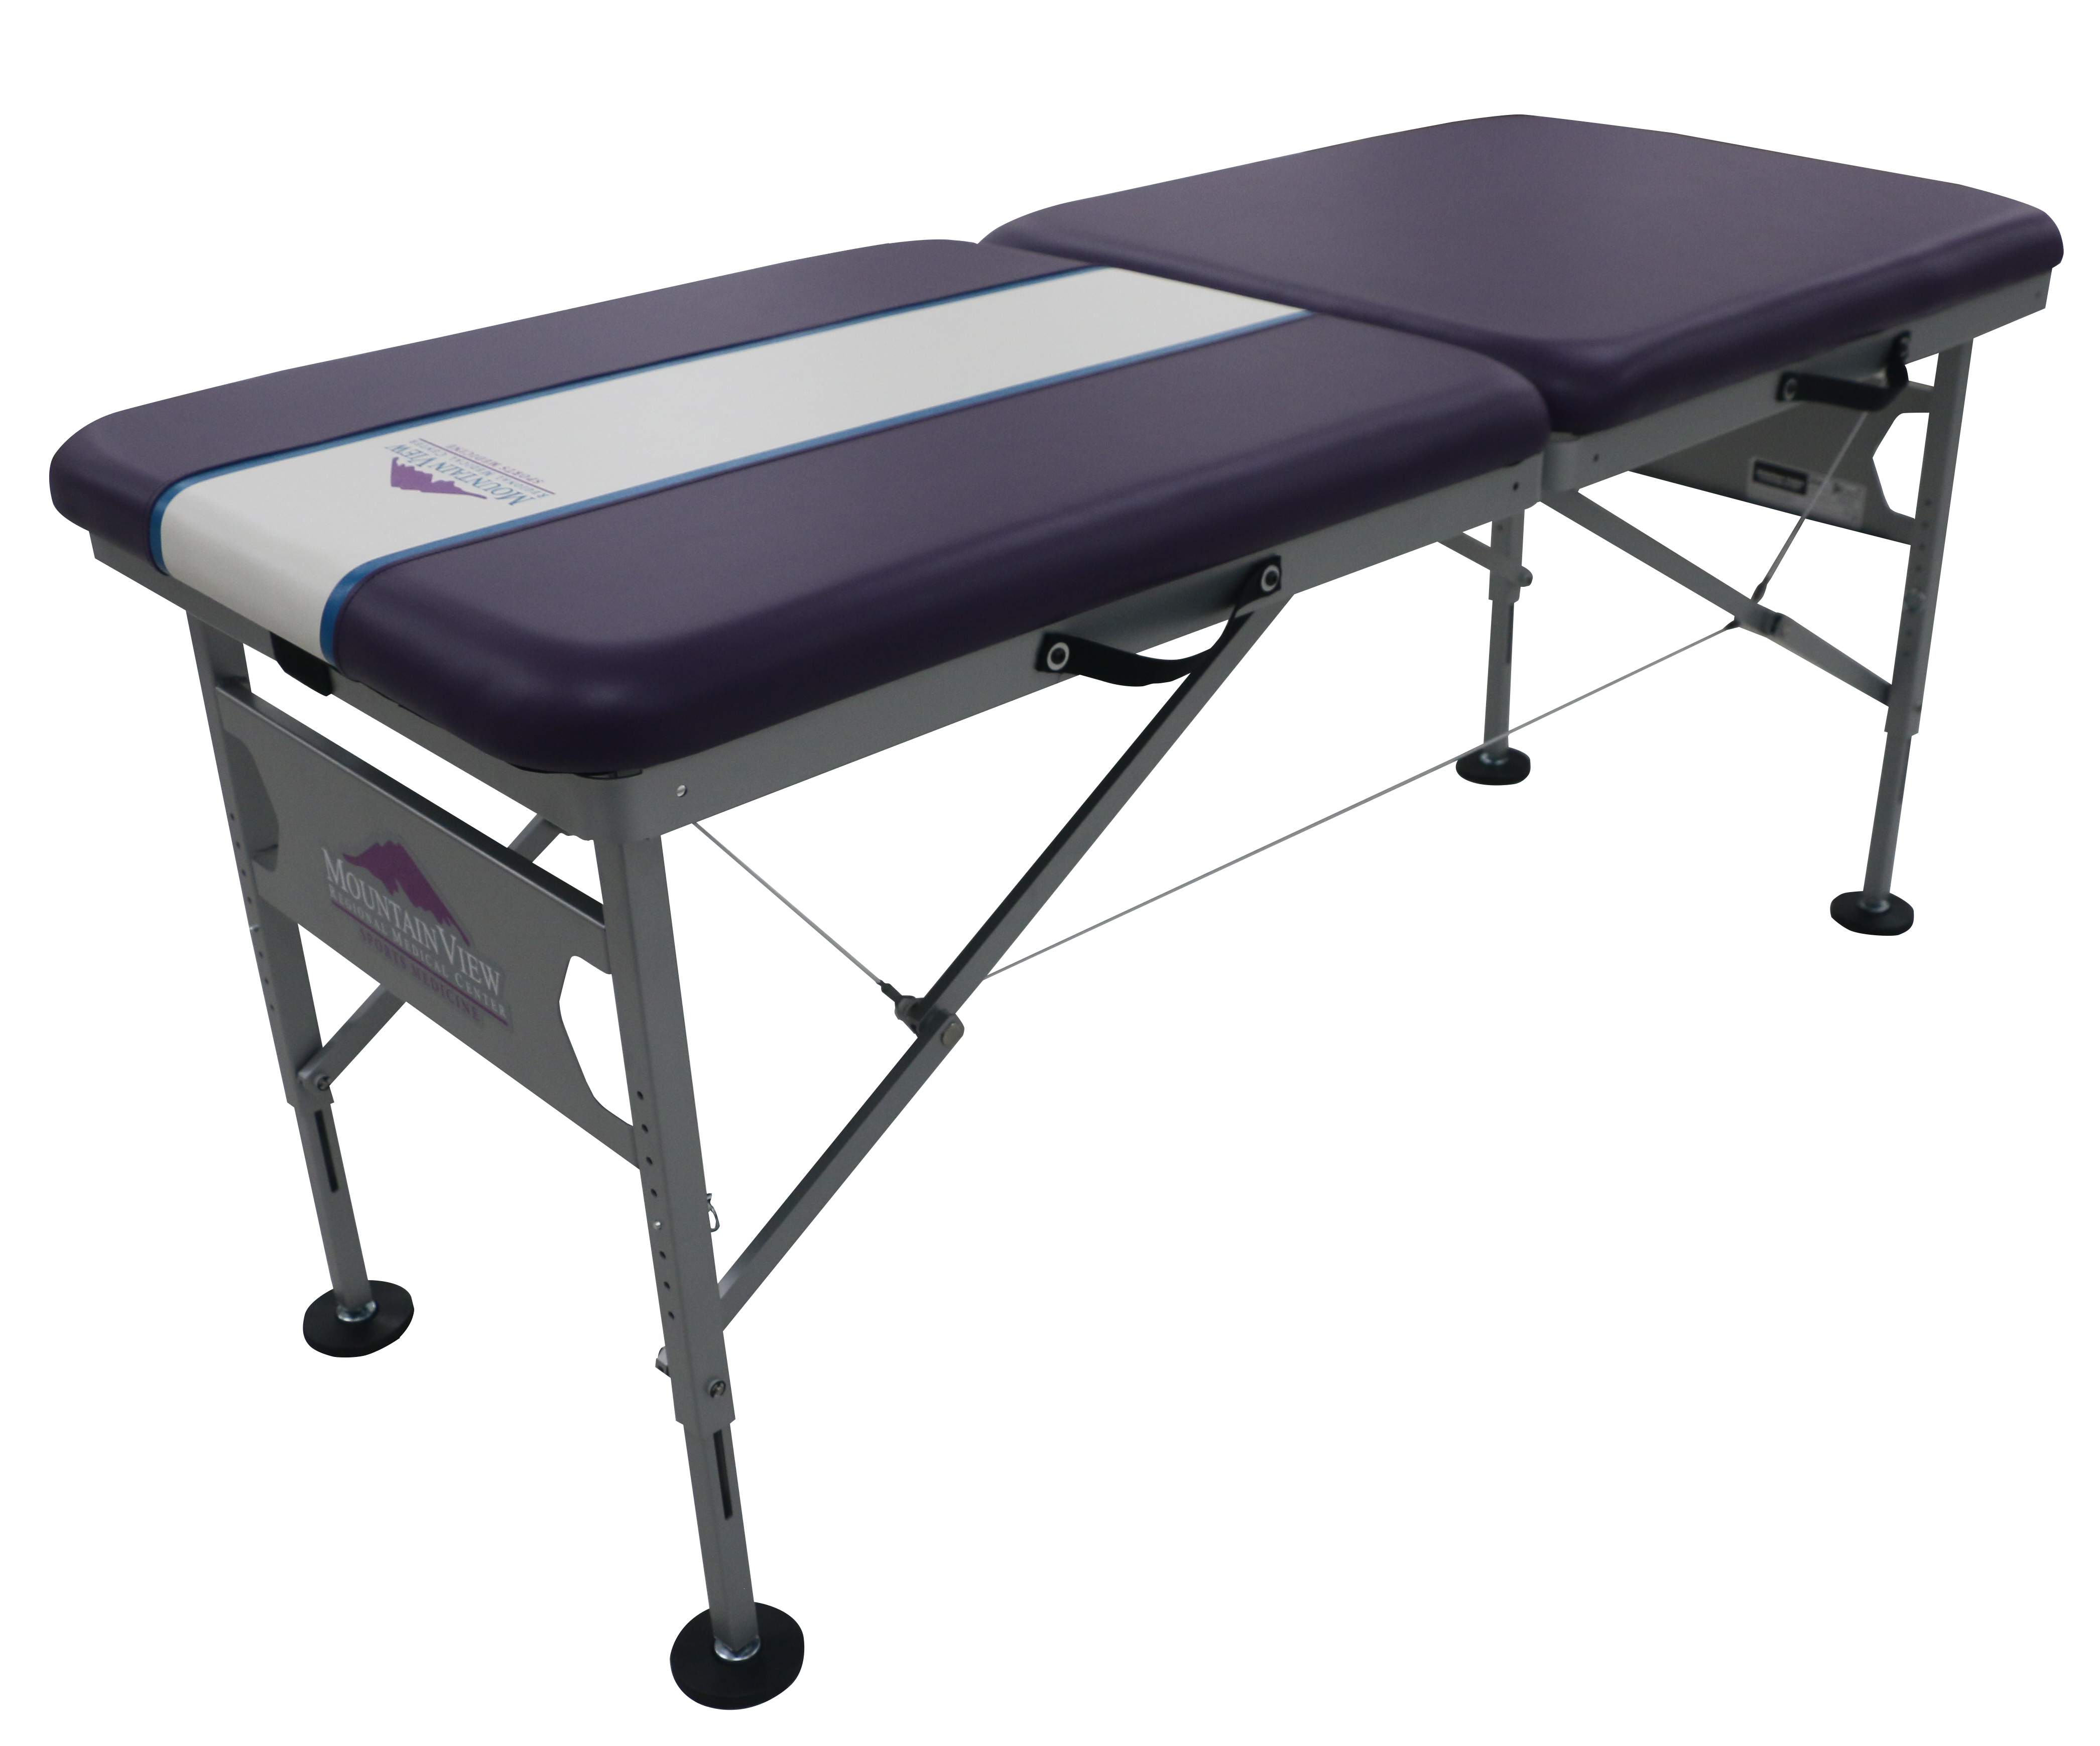 Mountain View-(Portable Sideline Table)